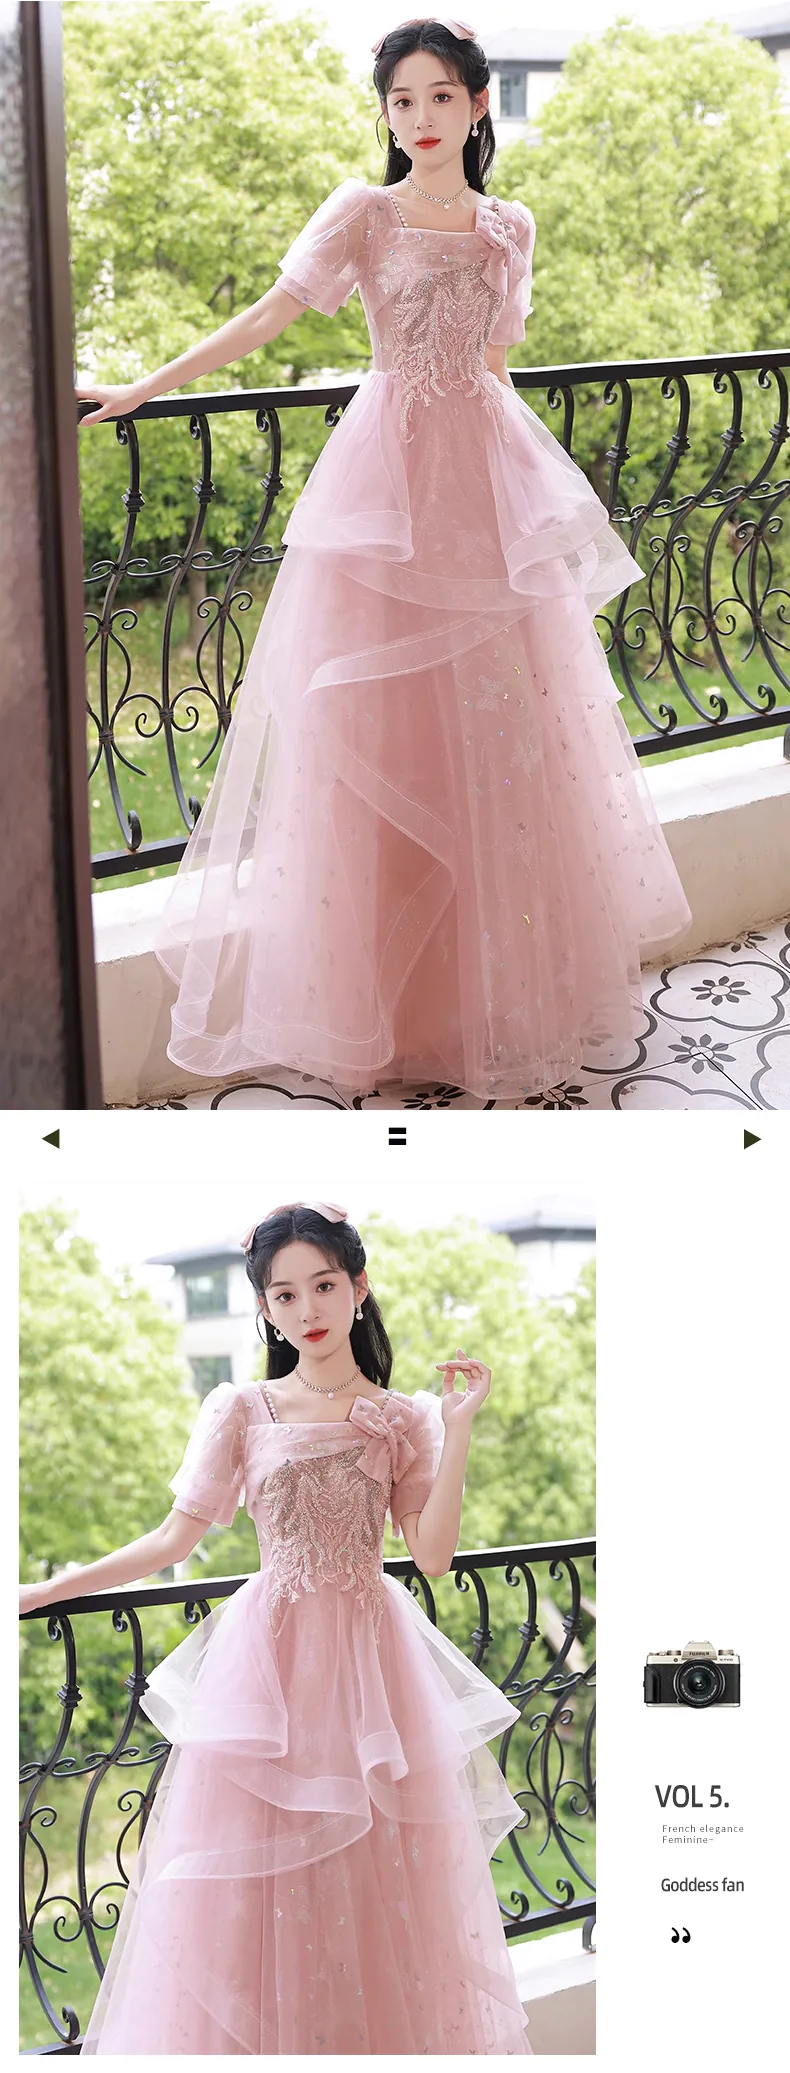 Charming-Pink-Embroidery-Short-Sleeve-Evening-Party-Prom-Long-Dress13